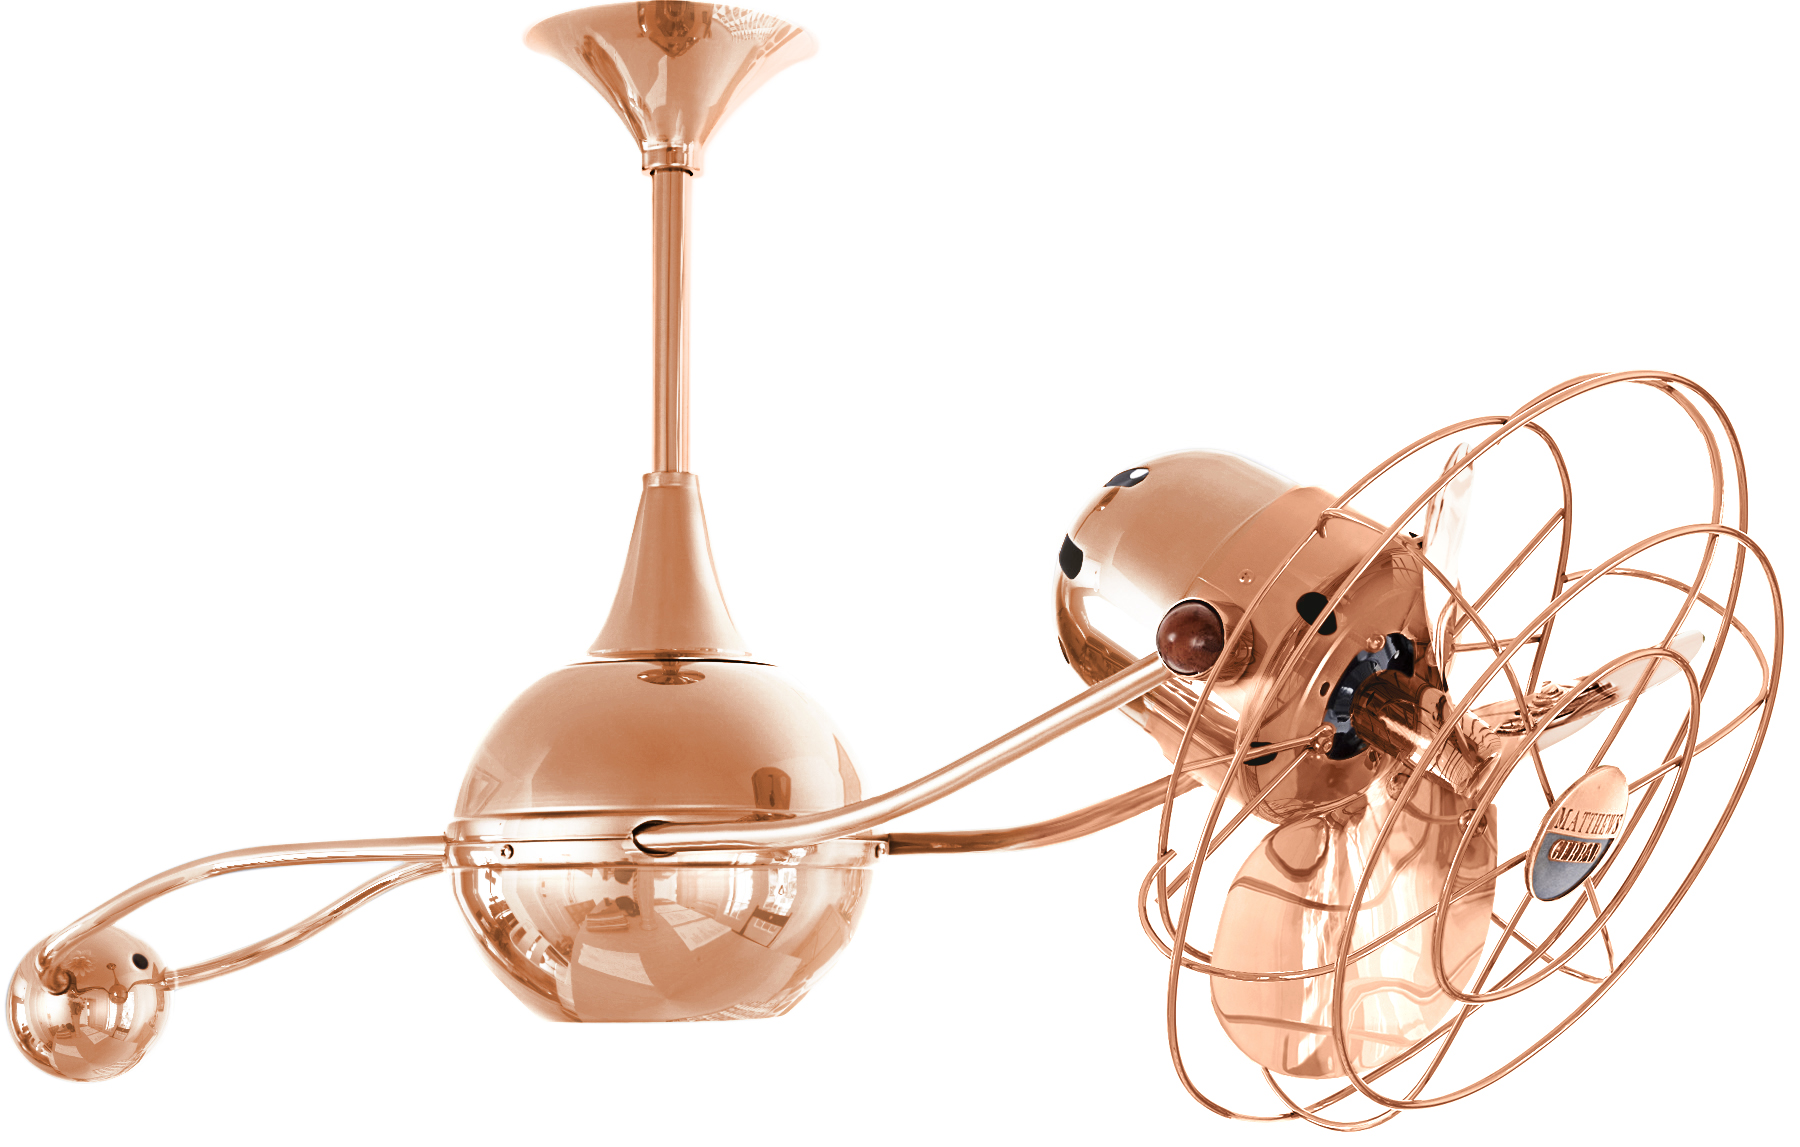 Brisa 2000 ceiling fan in polished copper finish with metal blades in decorative cage made by Matthews Fan Company.